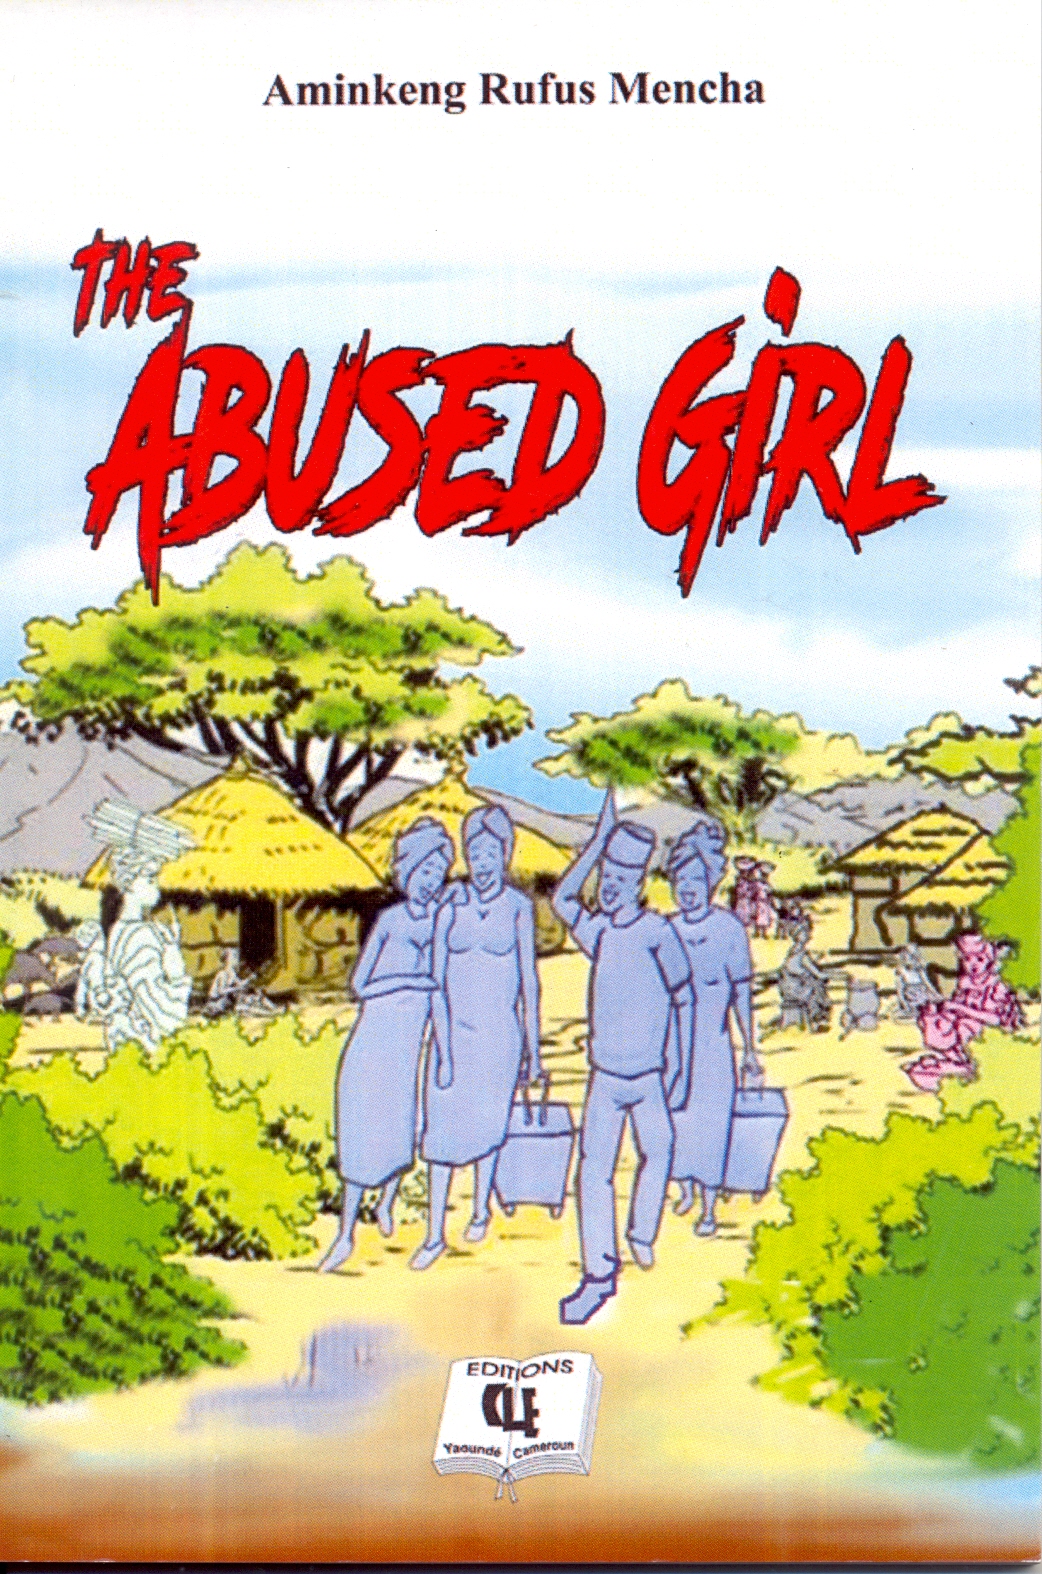 The abused girl